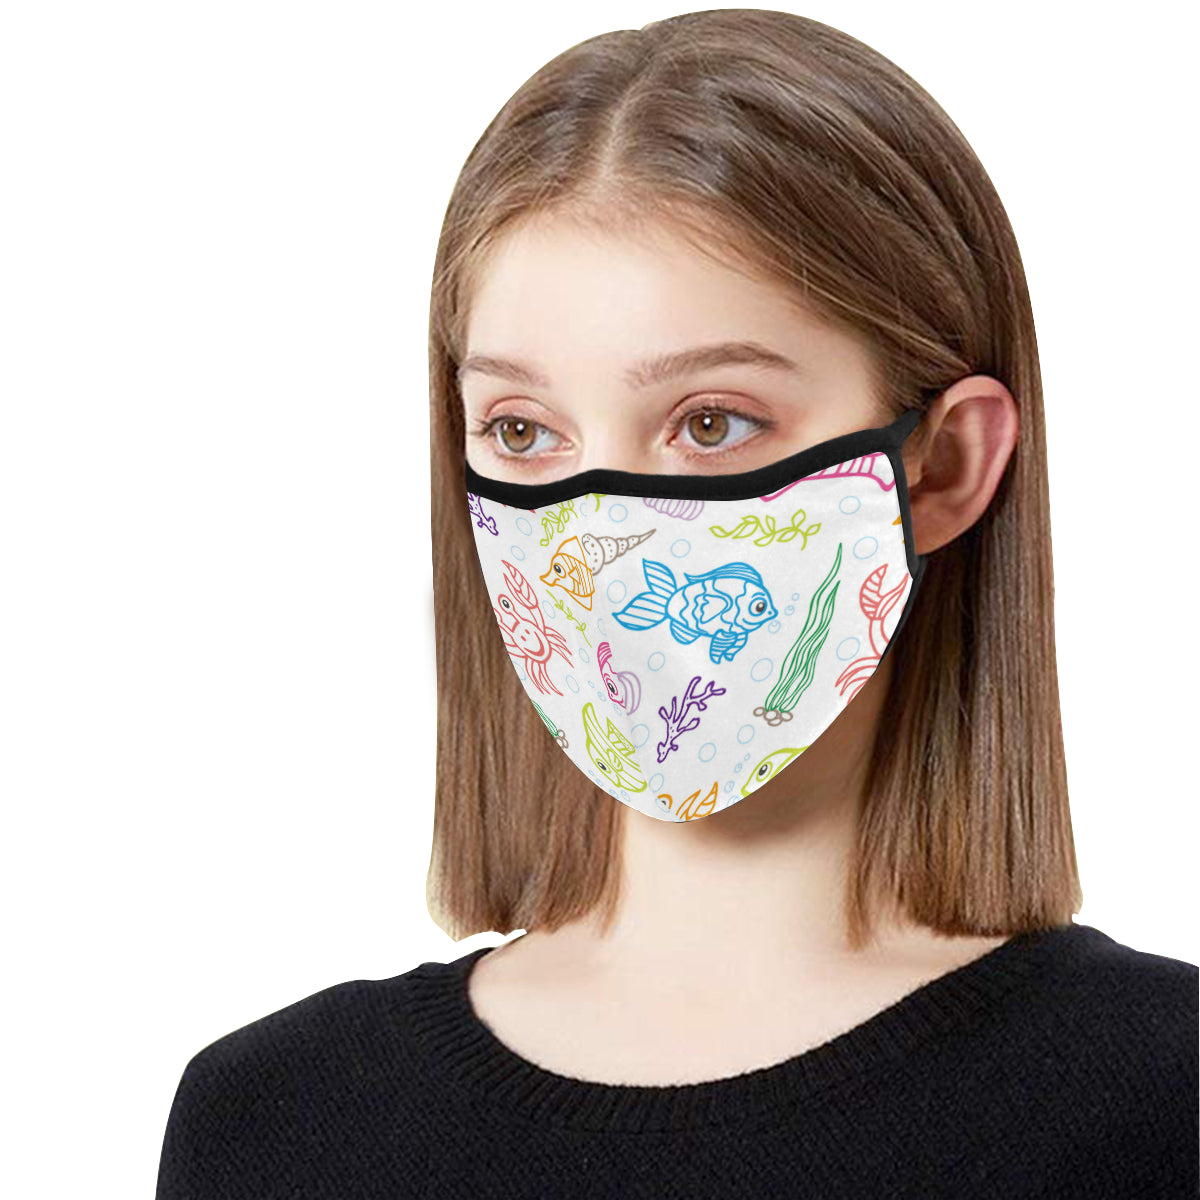 Aquarium Print Cotton Fabric Face Mask with filter slot (30 Filters Included) - Non-medical use